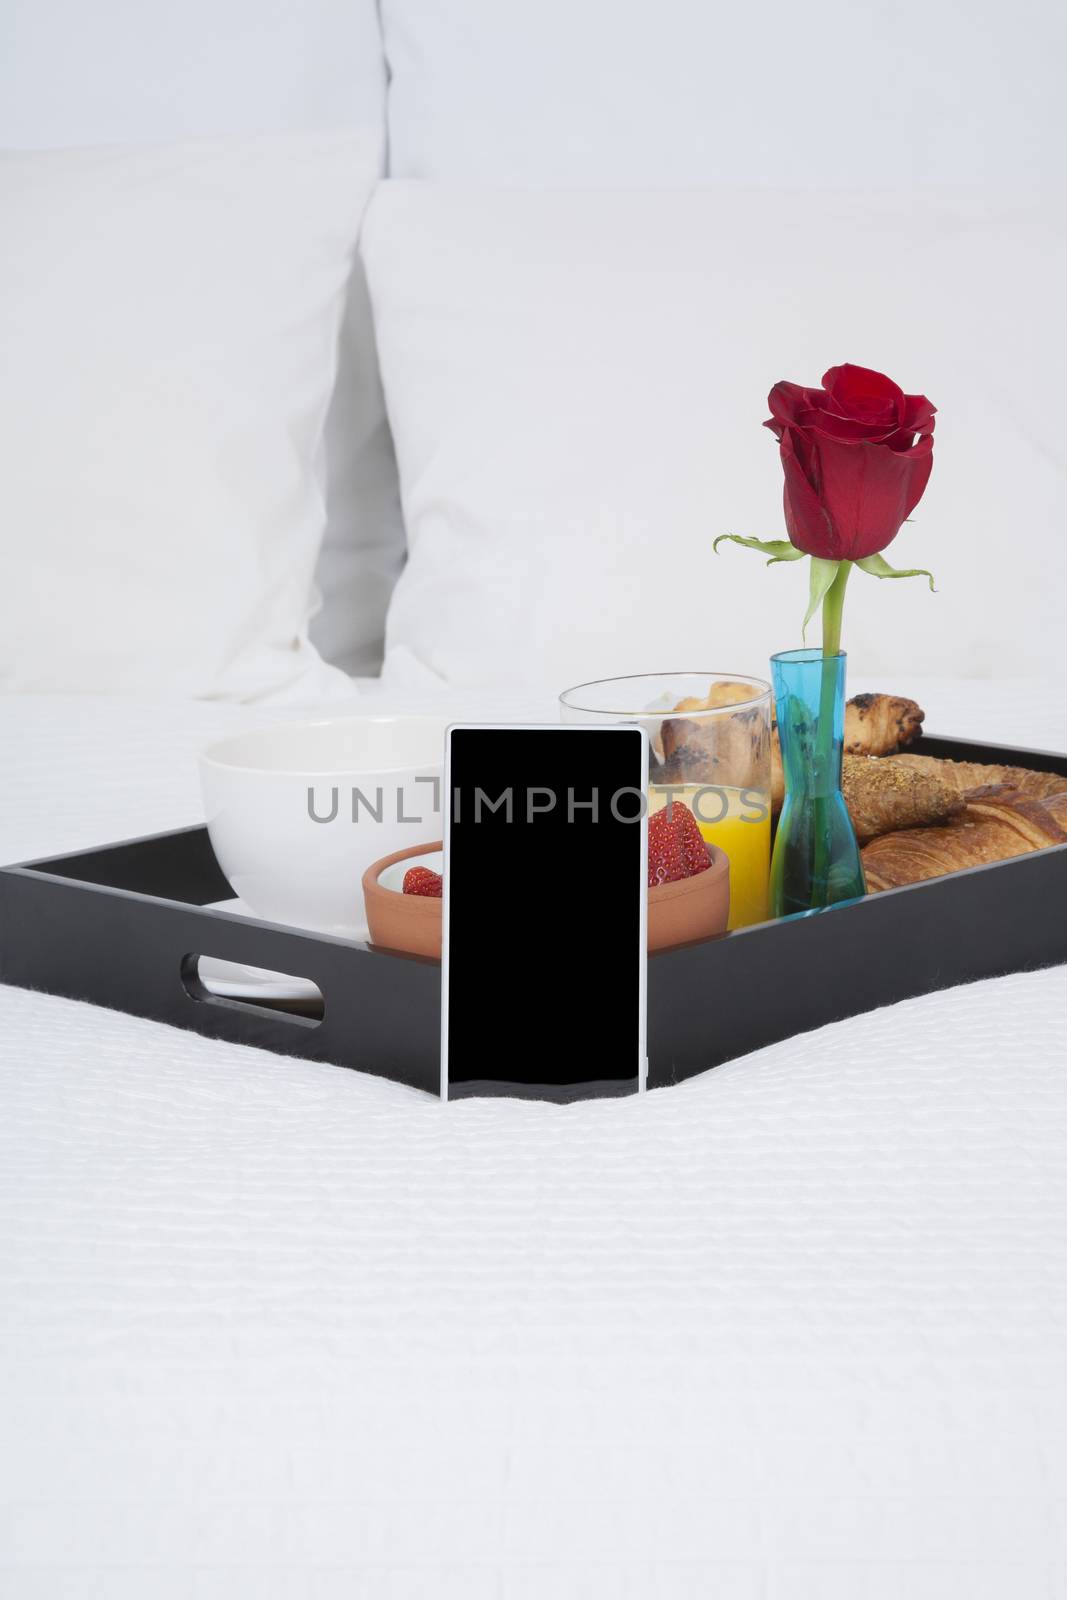 white quilt bed breakfast black tray croissants orange juice strawberry kiwi cupcake red rose flower and mobile phone blank screen